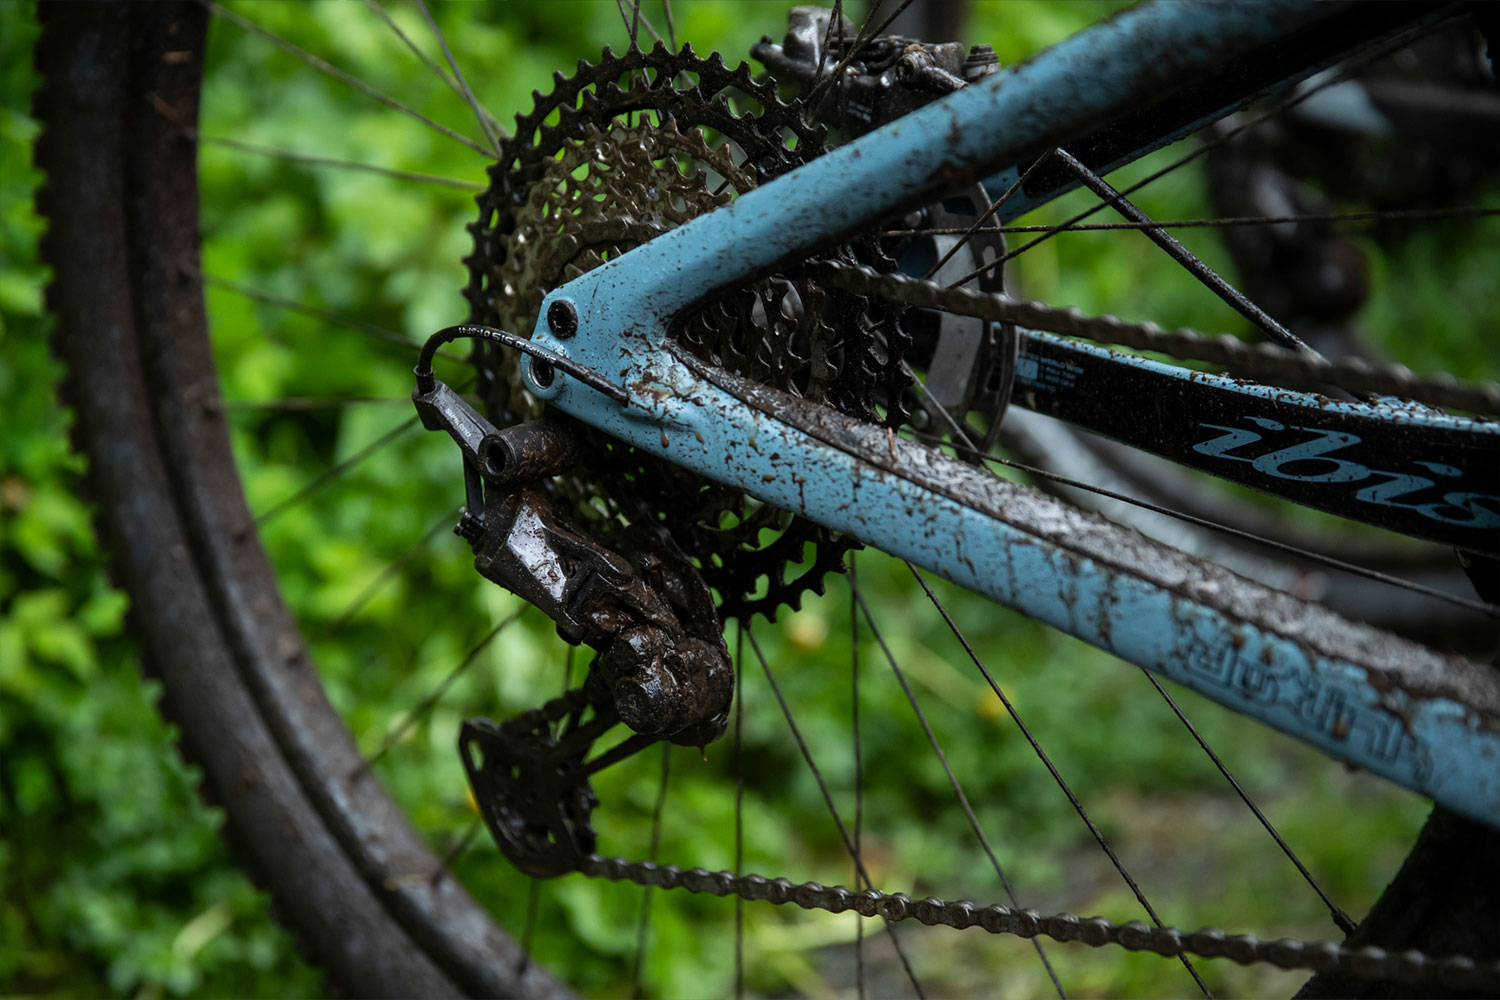 Shimano XTR M9100 MTB cassette covered in mud